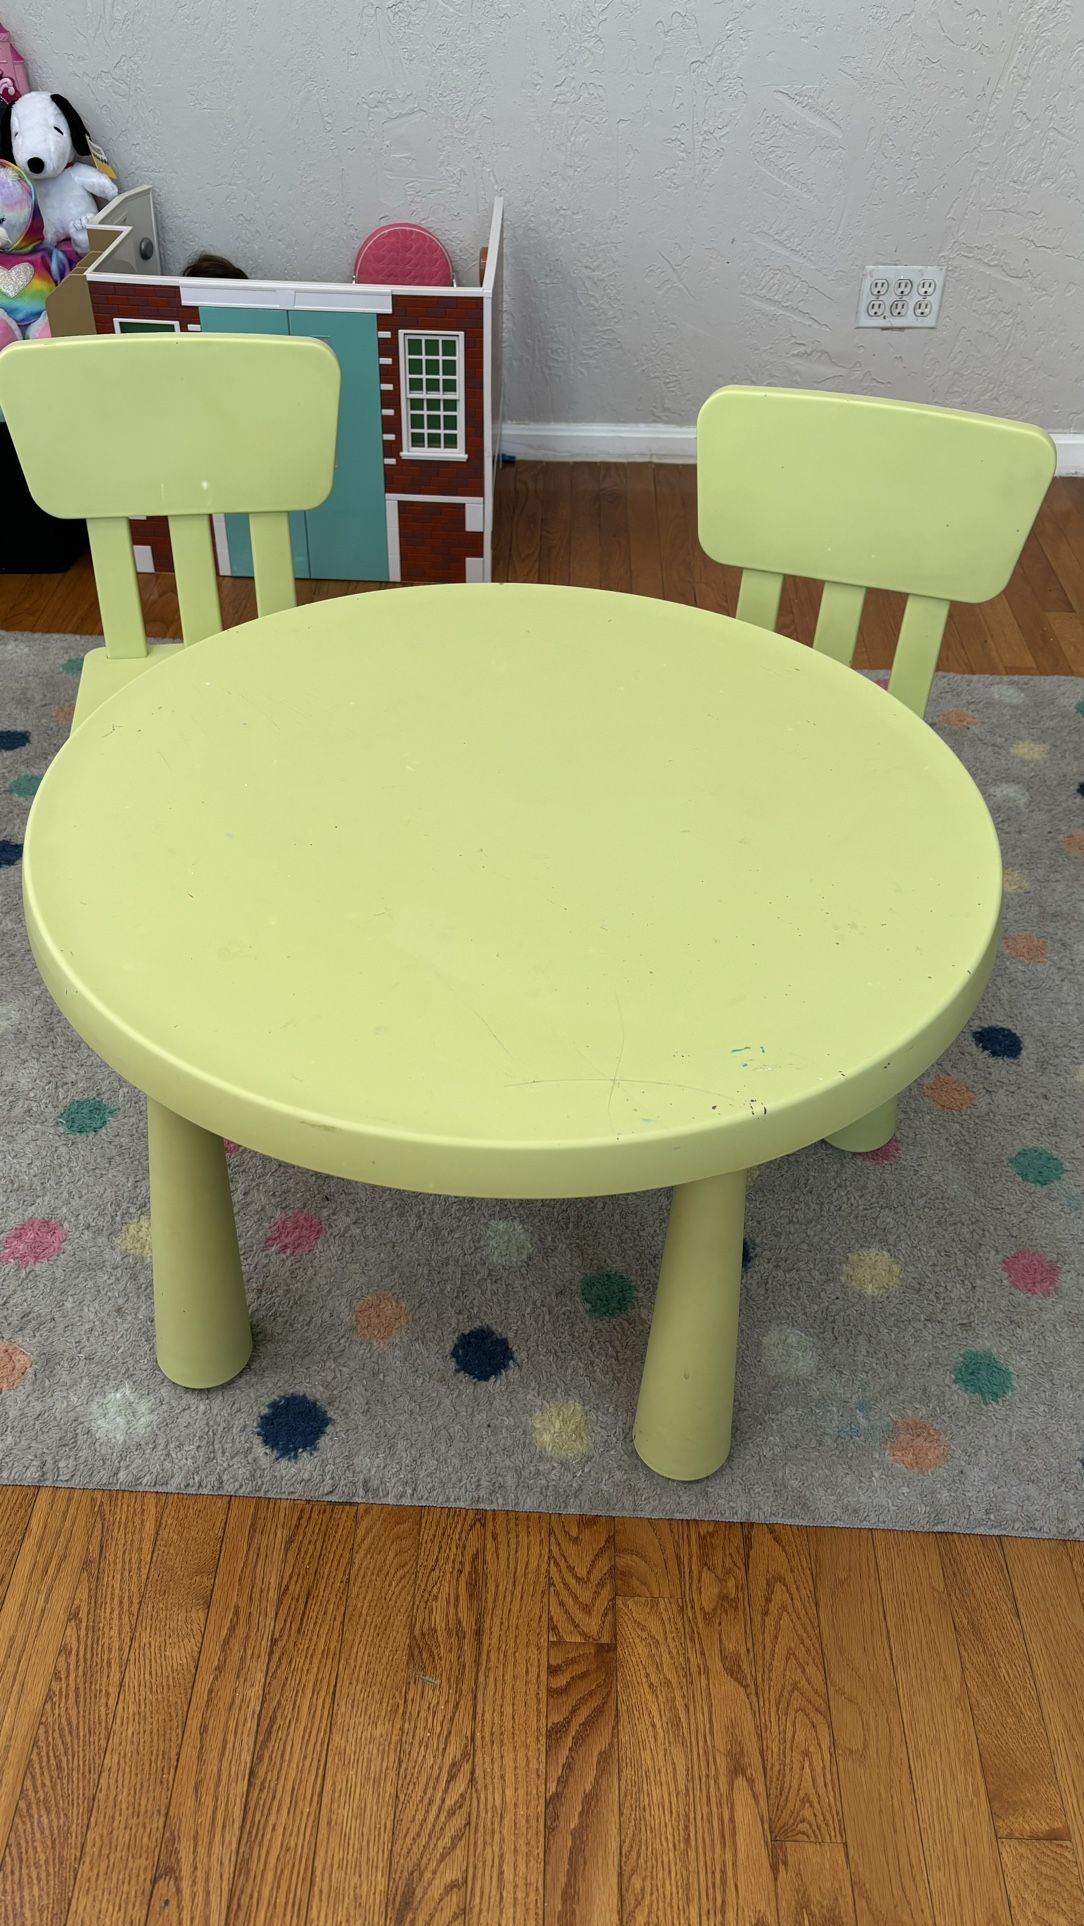 IKEA KIDS TABLE WITH CHAIRS